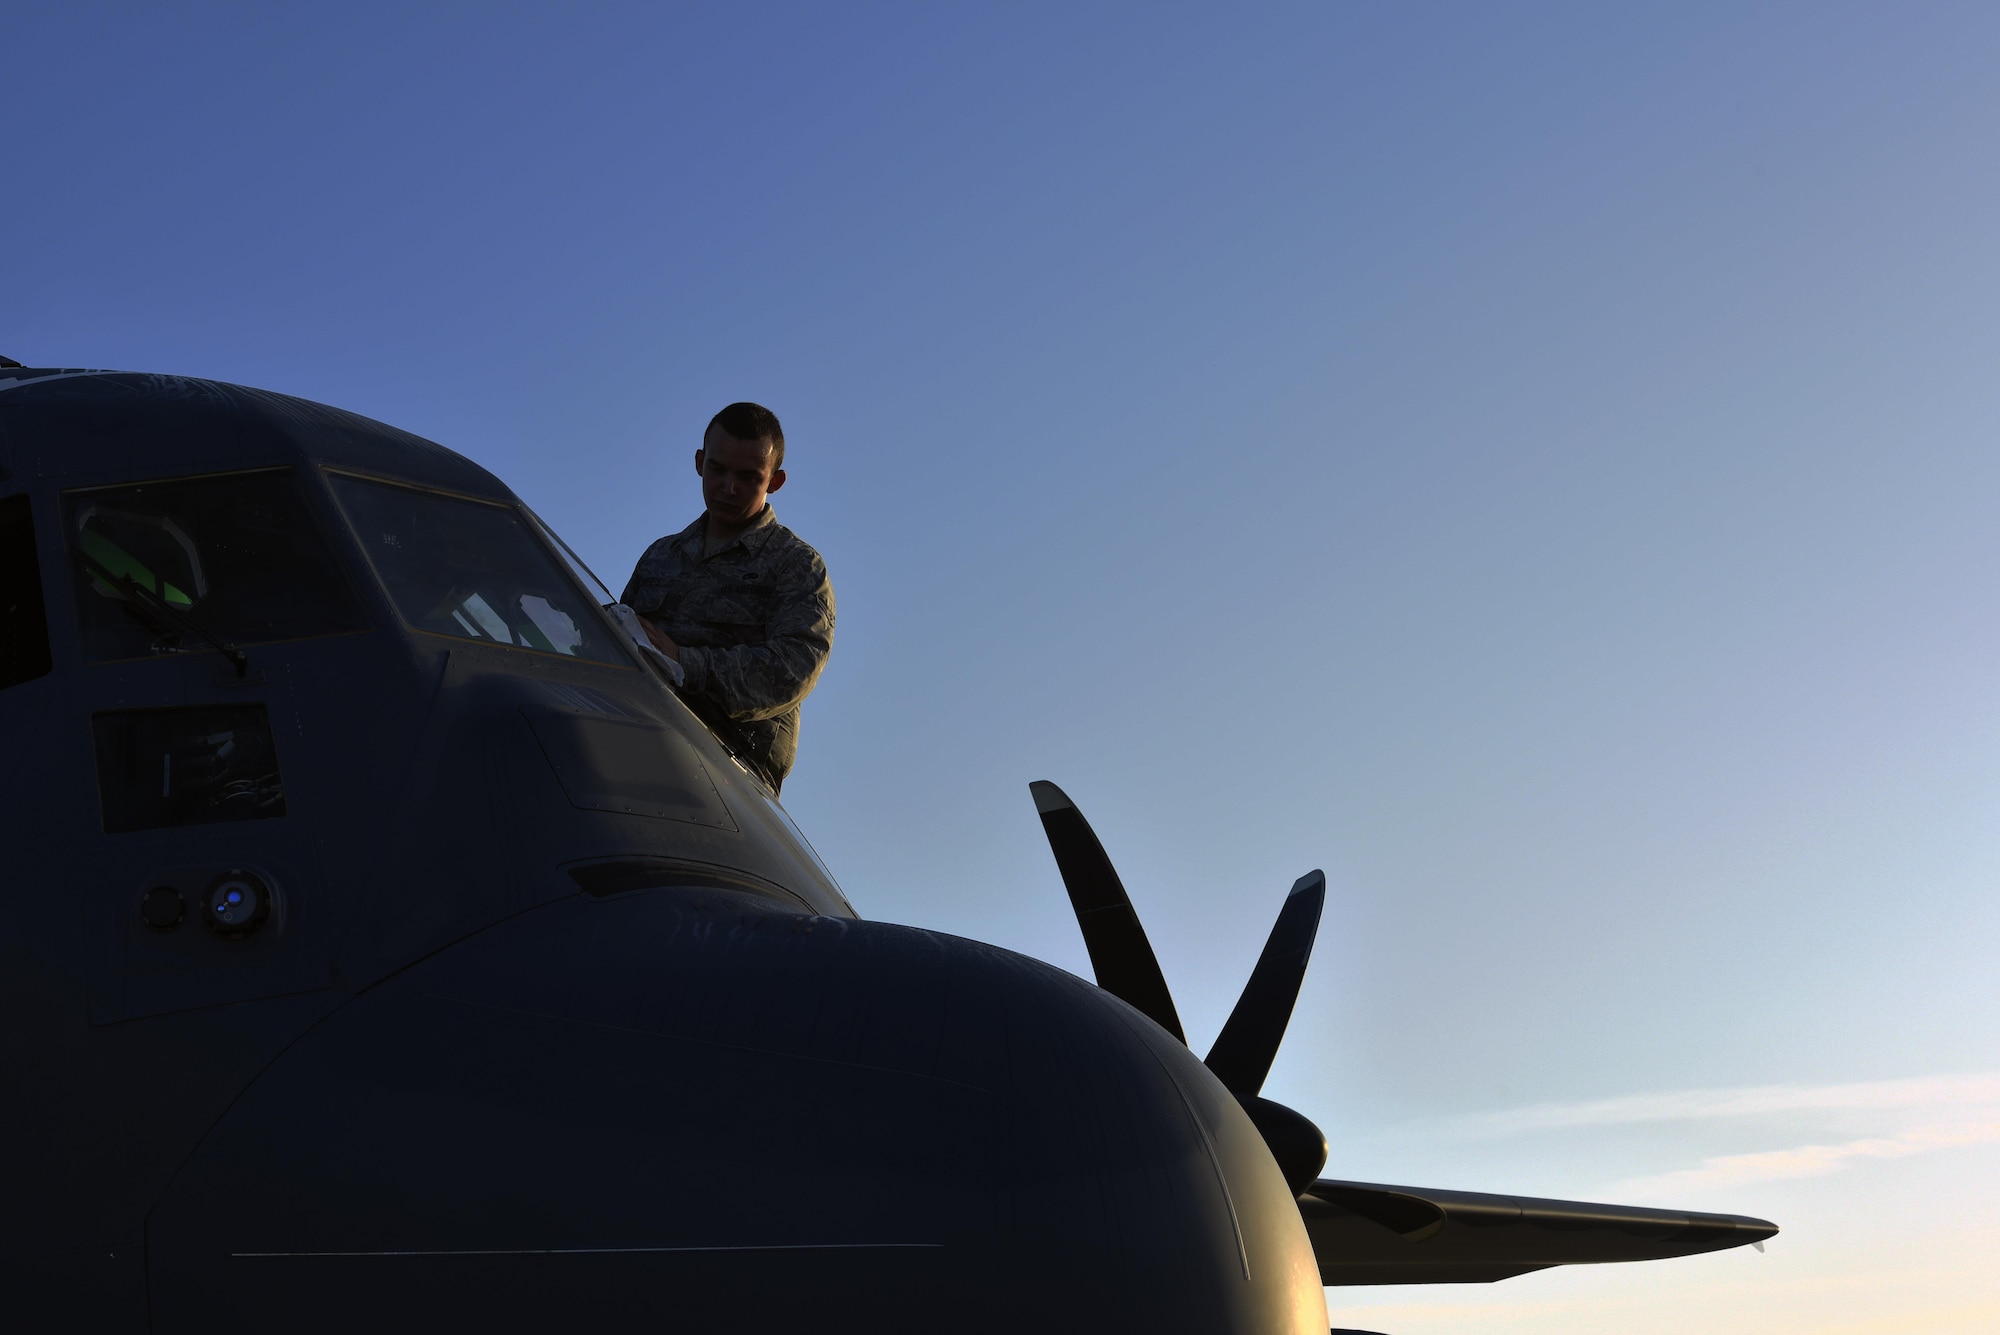 U.S. Air Force Airman 1st Class Justin Roberts, 71st Rescue Squadron crew chief, cleans the windshield of an HC-130J Combat King II prior to pilot proficiency training, Sept. 27, 2016, at Moody Air Force Base, Ga. During training, pilots test the HC-130J’s capabilities to perform a multitude of flying techniques that aid search and rescue efforts, air refueling and airdrop operations. (U.S. Air Force photo by Airman 1st Class Greg Nash)